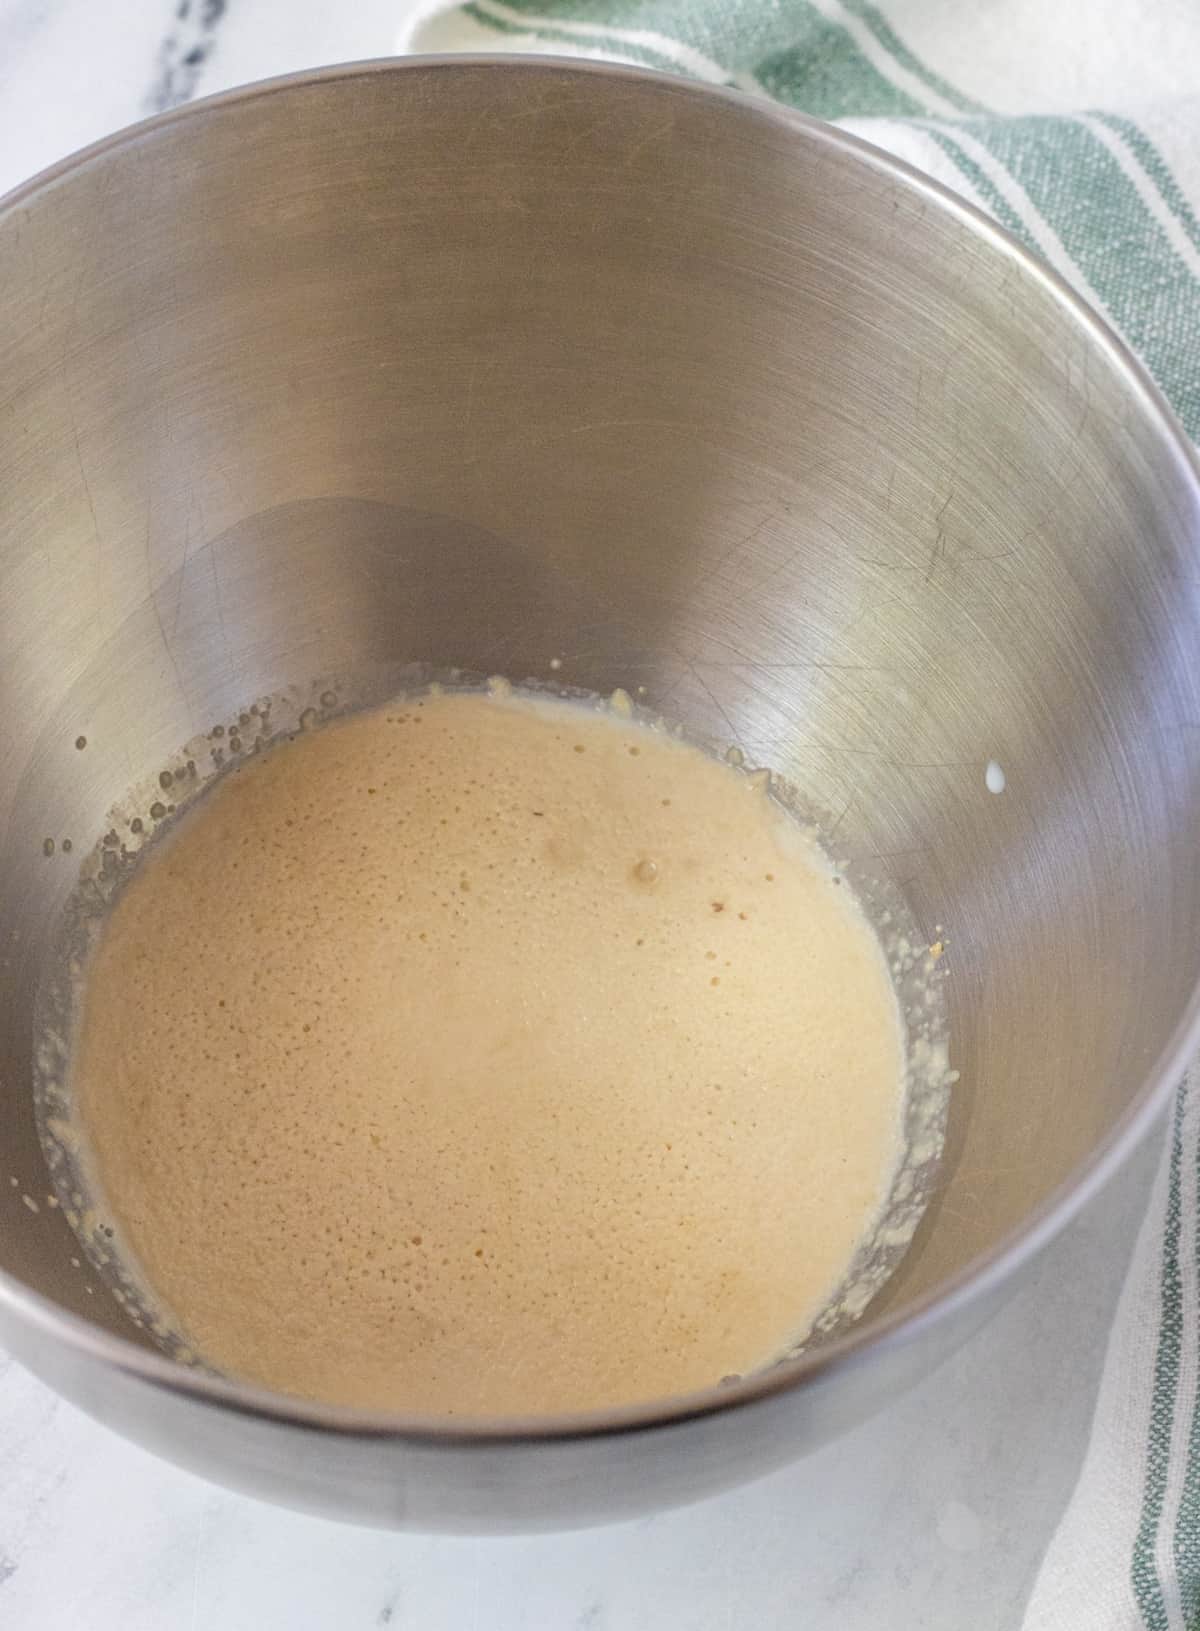 Frothy yeast in milk in a metal bowl.